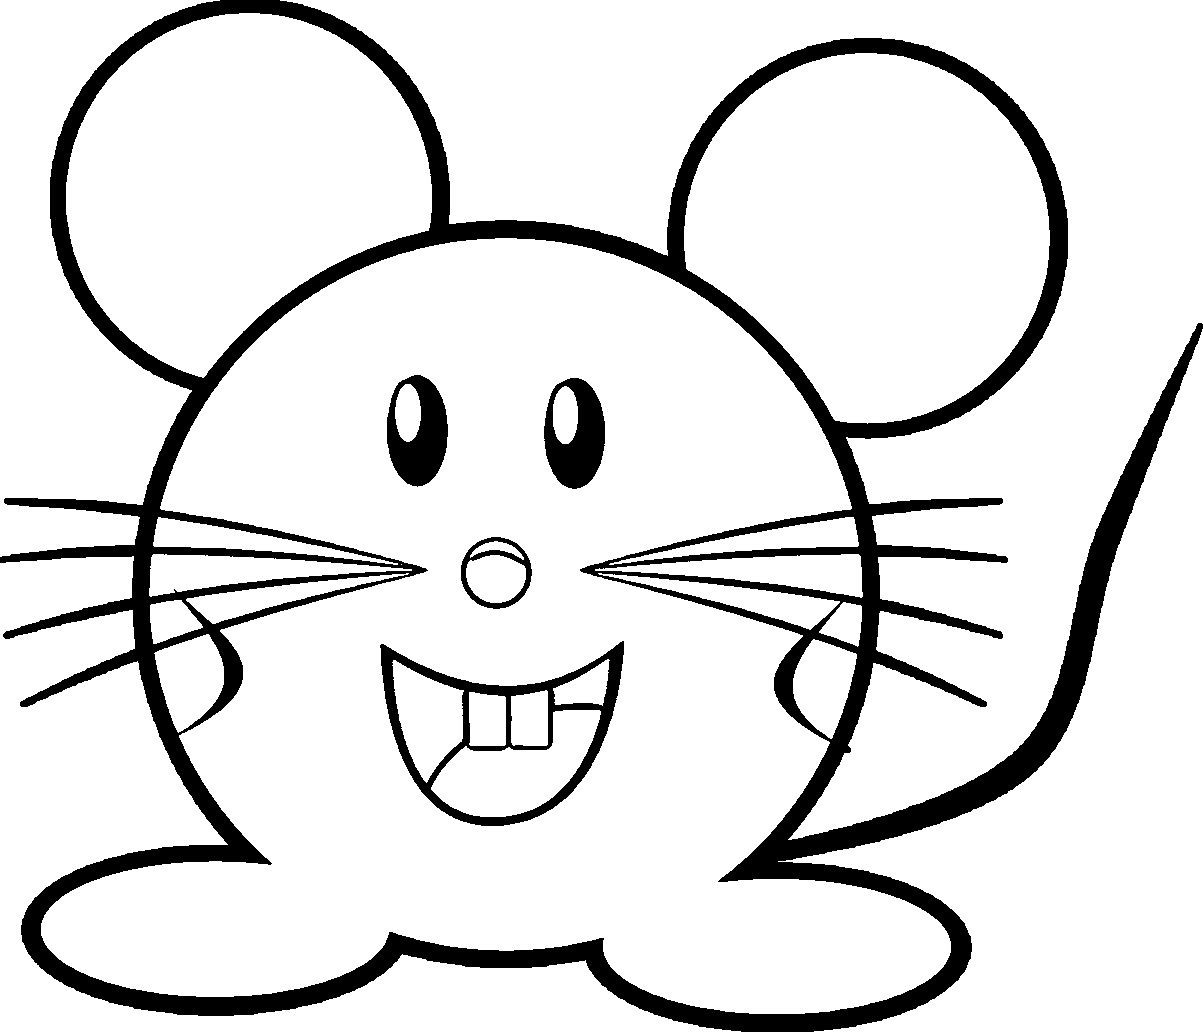 coloring pictures of mice mouse coloring pages wecoloringpagecom pictures of coloring mice 